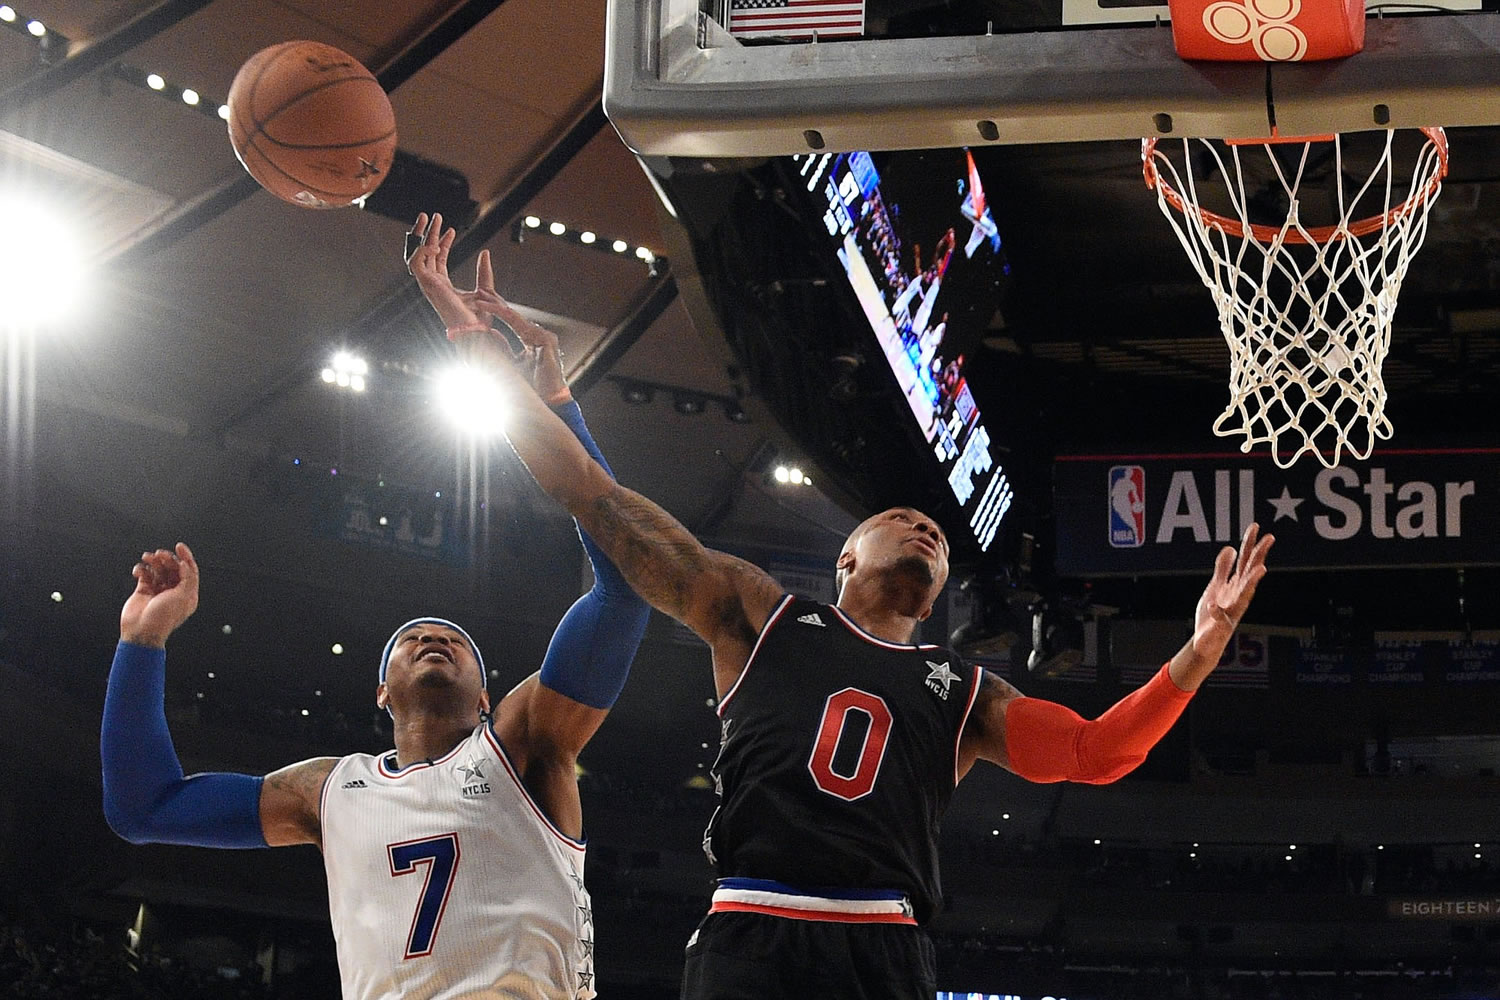 Portland Trail Blazers' Damian Lillard (0), playing for the West team, said he was &quot;surprised&quot; East team's Carmelo Anthony, back, jumped to block his shot on this play during Sunday's All-Star Game at Madison Square Garden.(AP Photo/Bob Donnan, Pool)